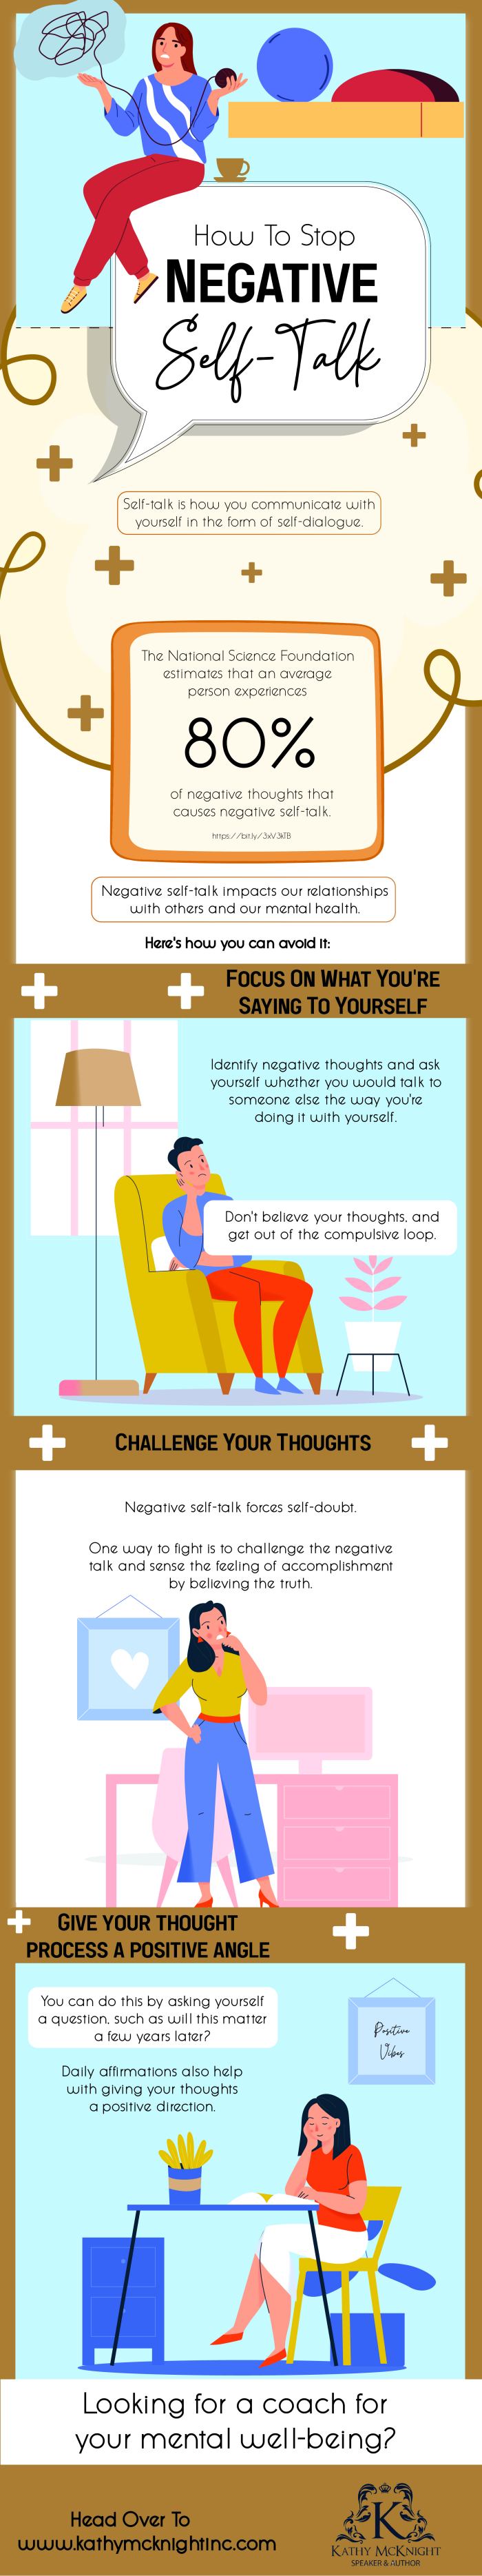  How To Stop Negative Self-Talk?